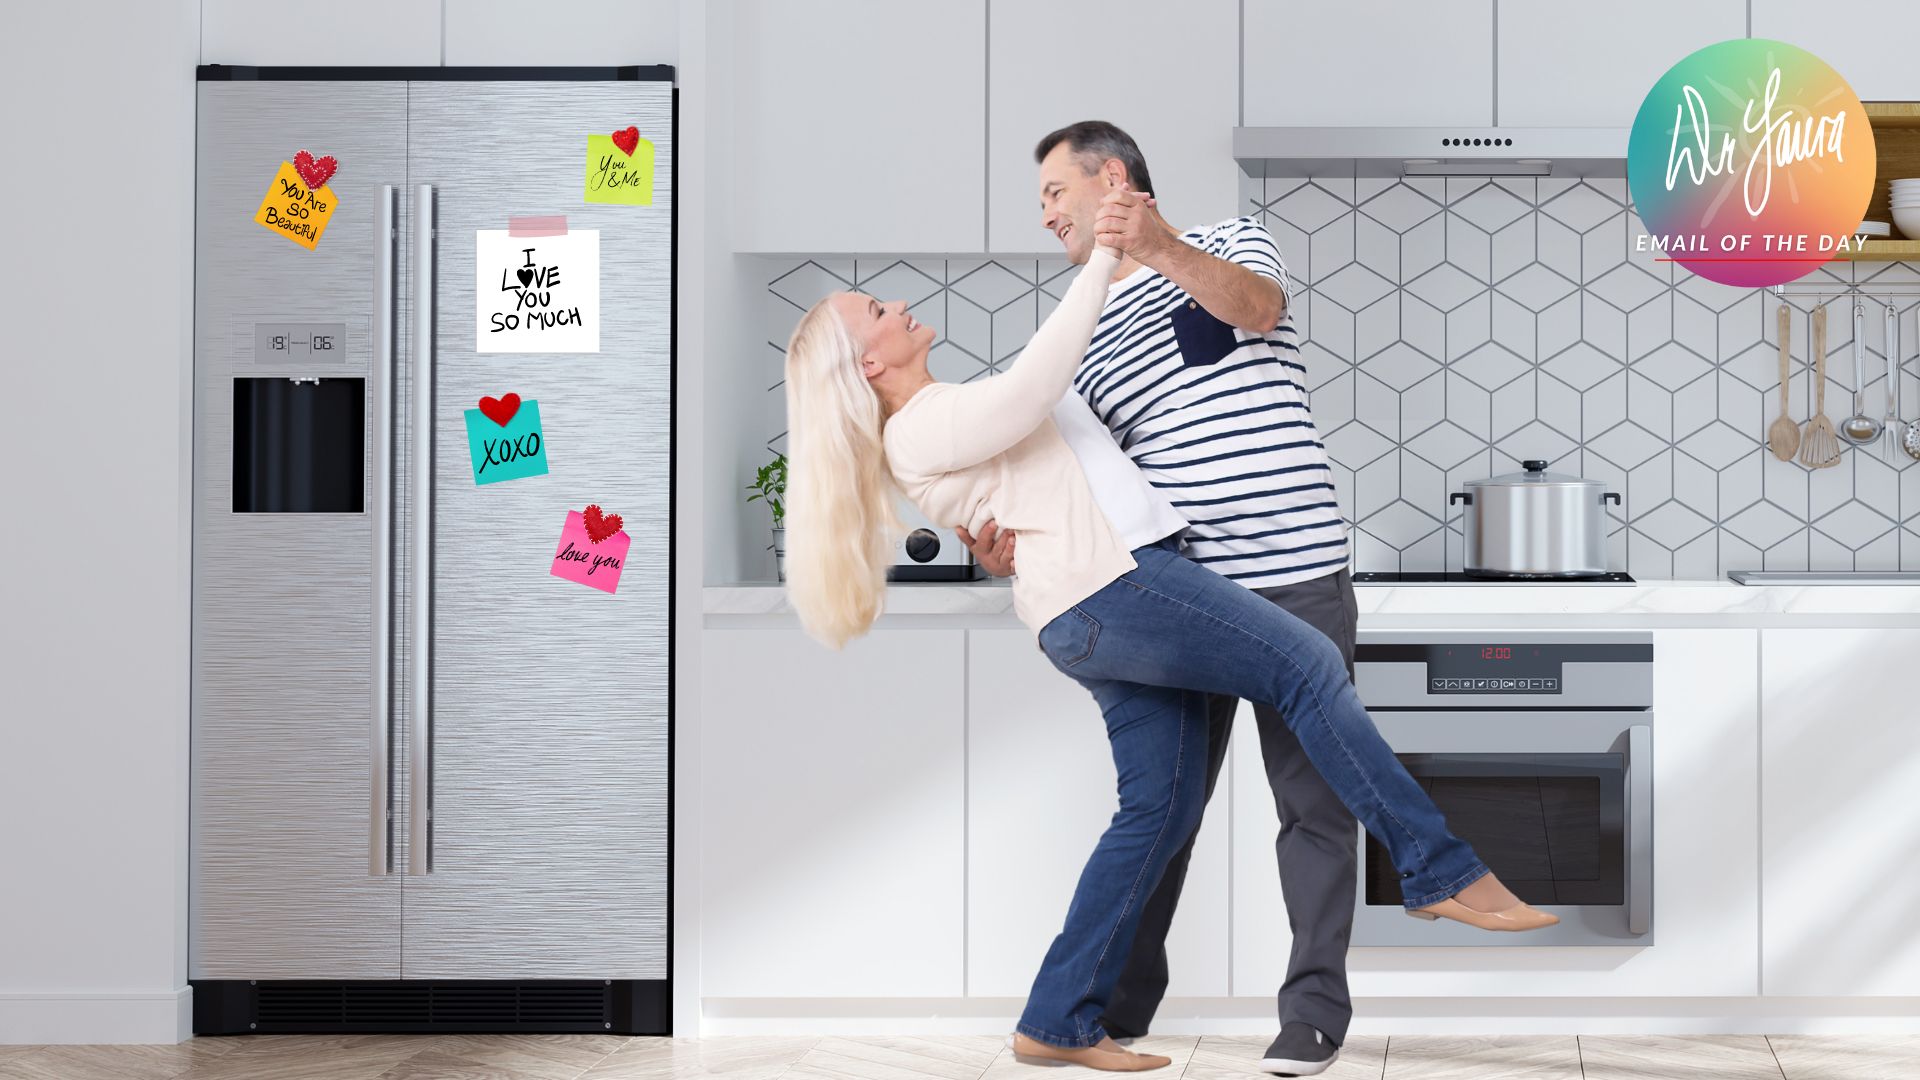 Email of the Day: Our Fridge Is a Place of Love